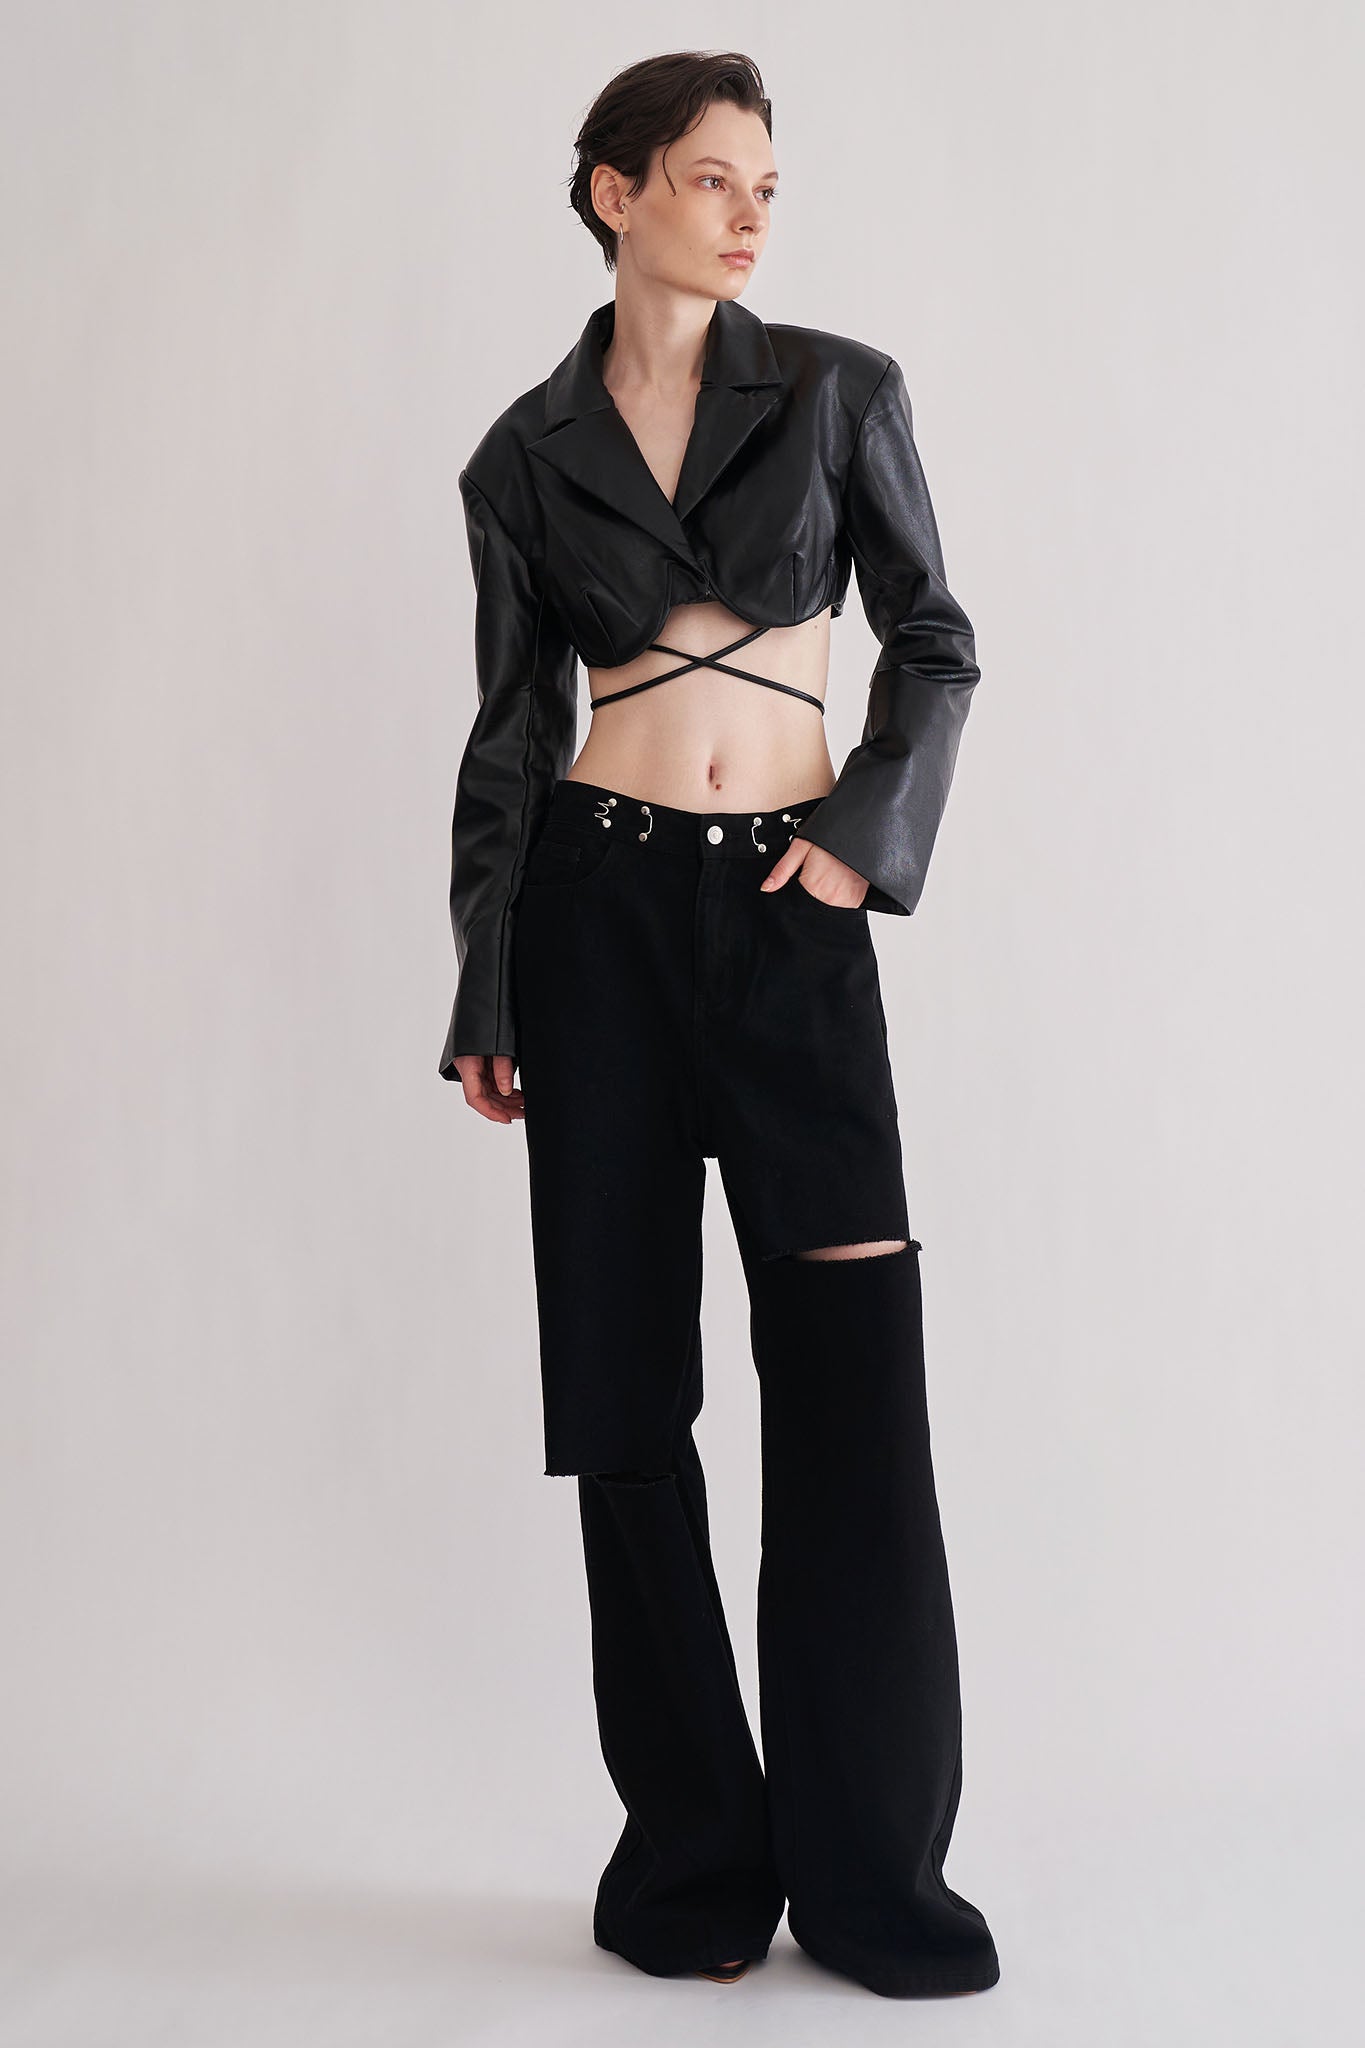 Strappy Faux Leather Jacket